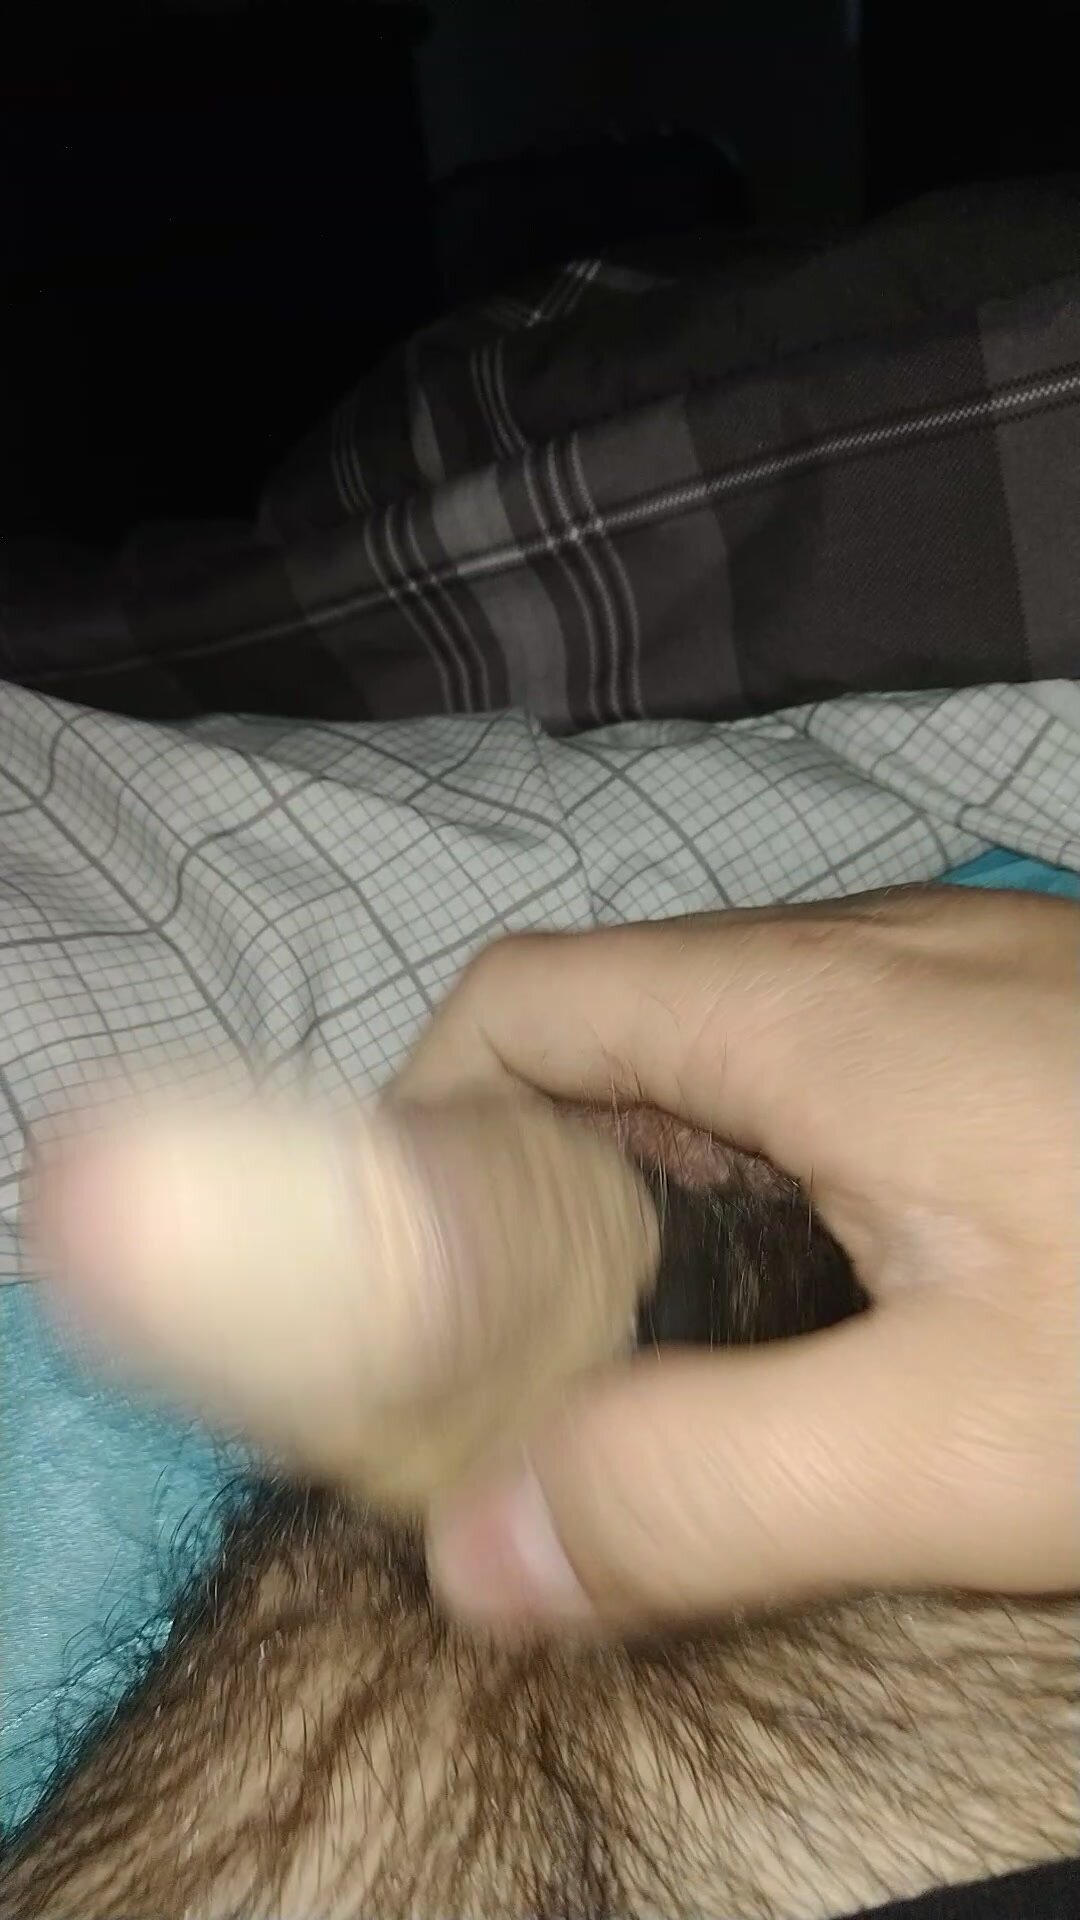 Small cock with foreskin peeled back